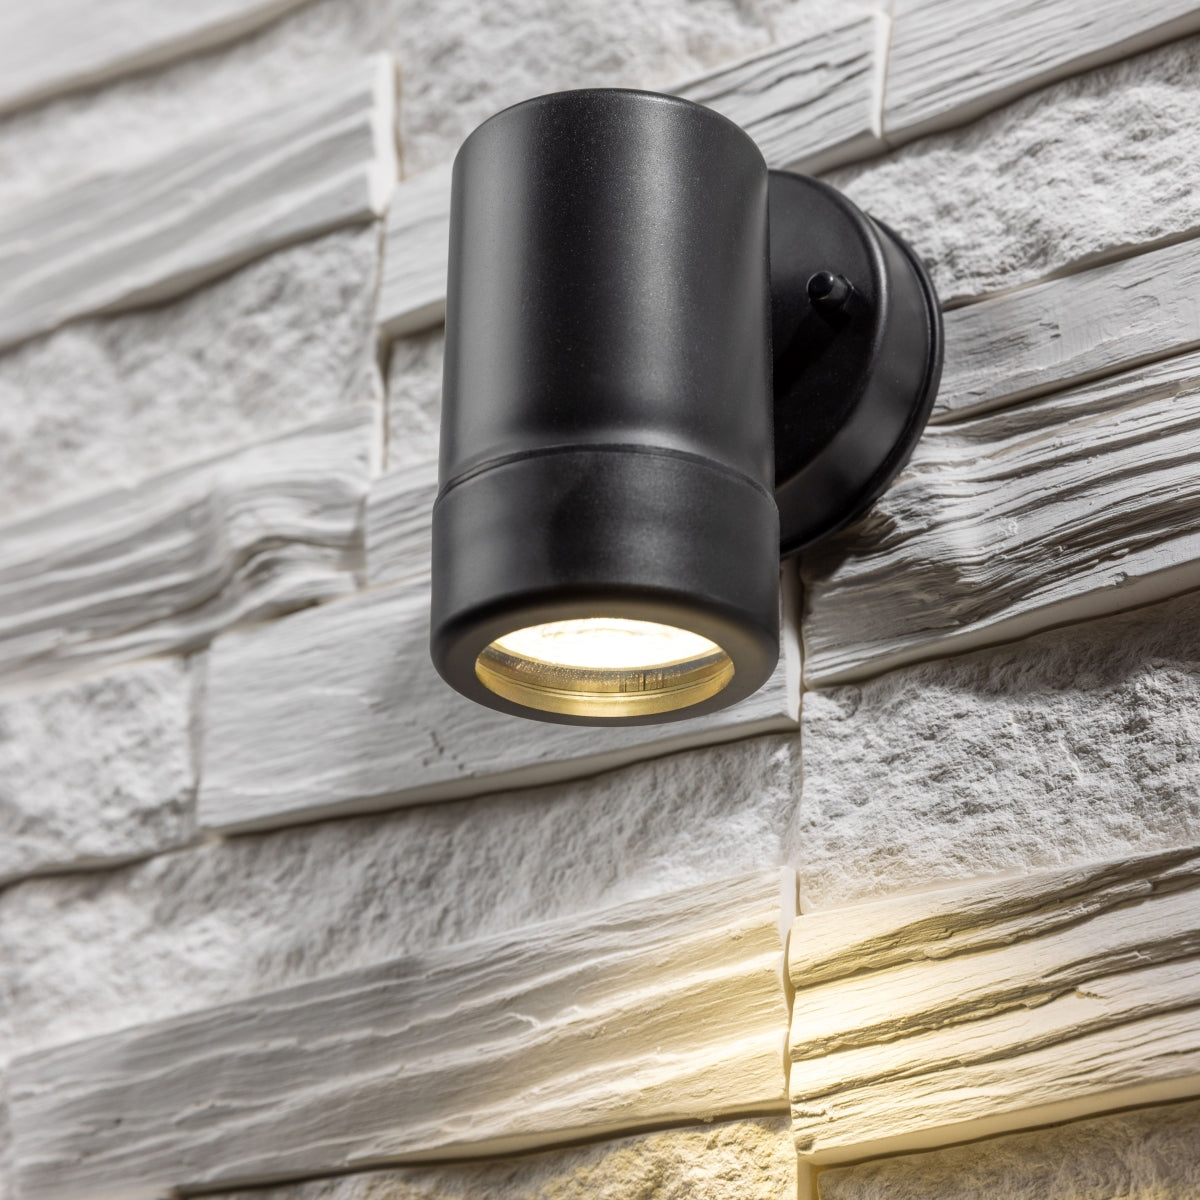 Our Valentine black outdoor single spot wall light would look perfect in a modern or more traditional home design. Outside wall lights can provide atmospheric light in your garden, at the front door or on the terrace as well as a great security solution. It is designed for durability and longevity with its robust material producing a fully weatherproof and water resistant light fitting